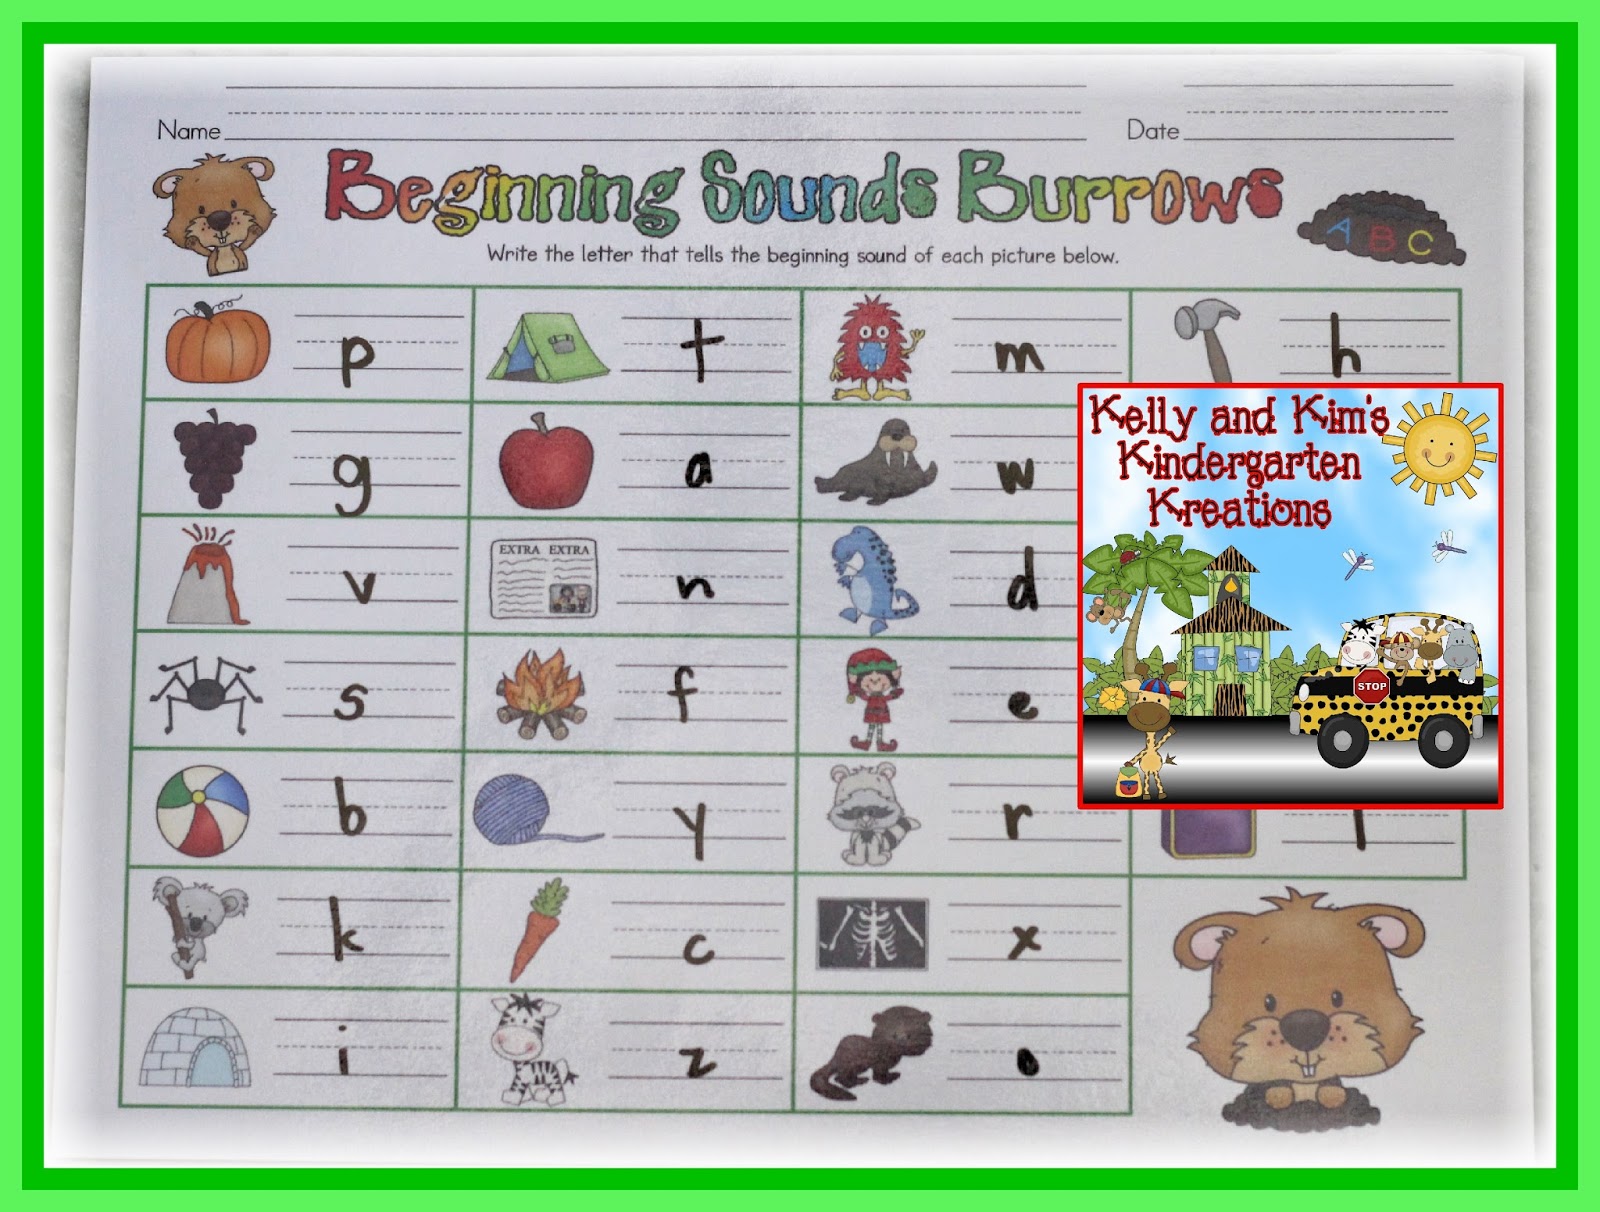 We Have Also Included A Recording Sheet For The Children To Write The    